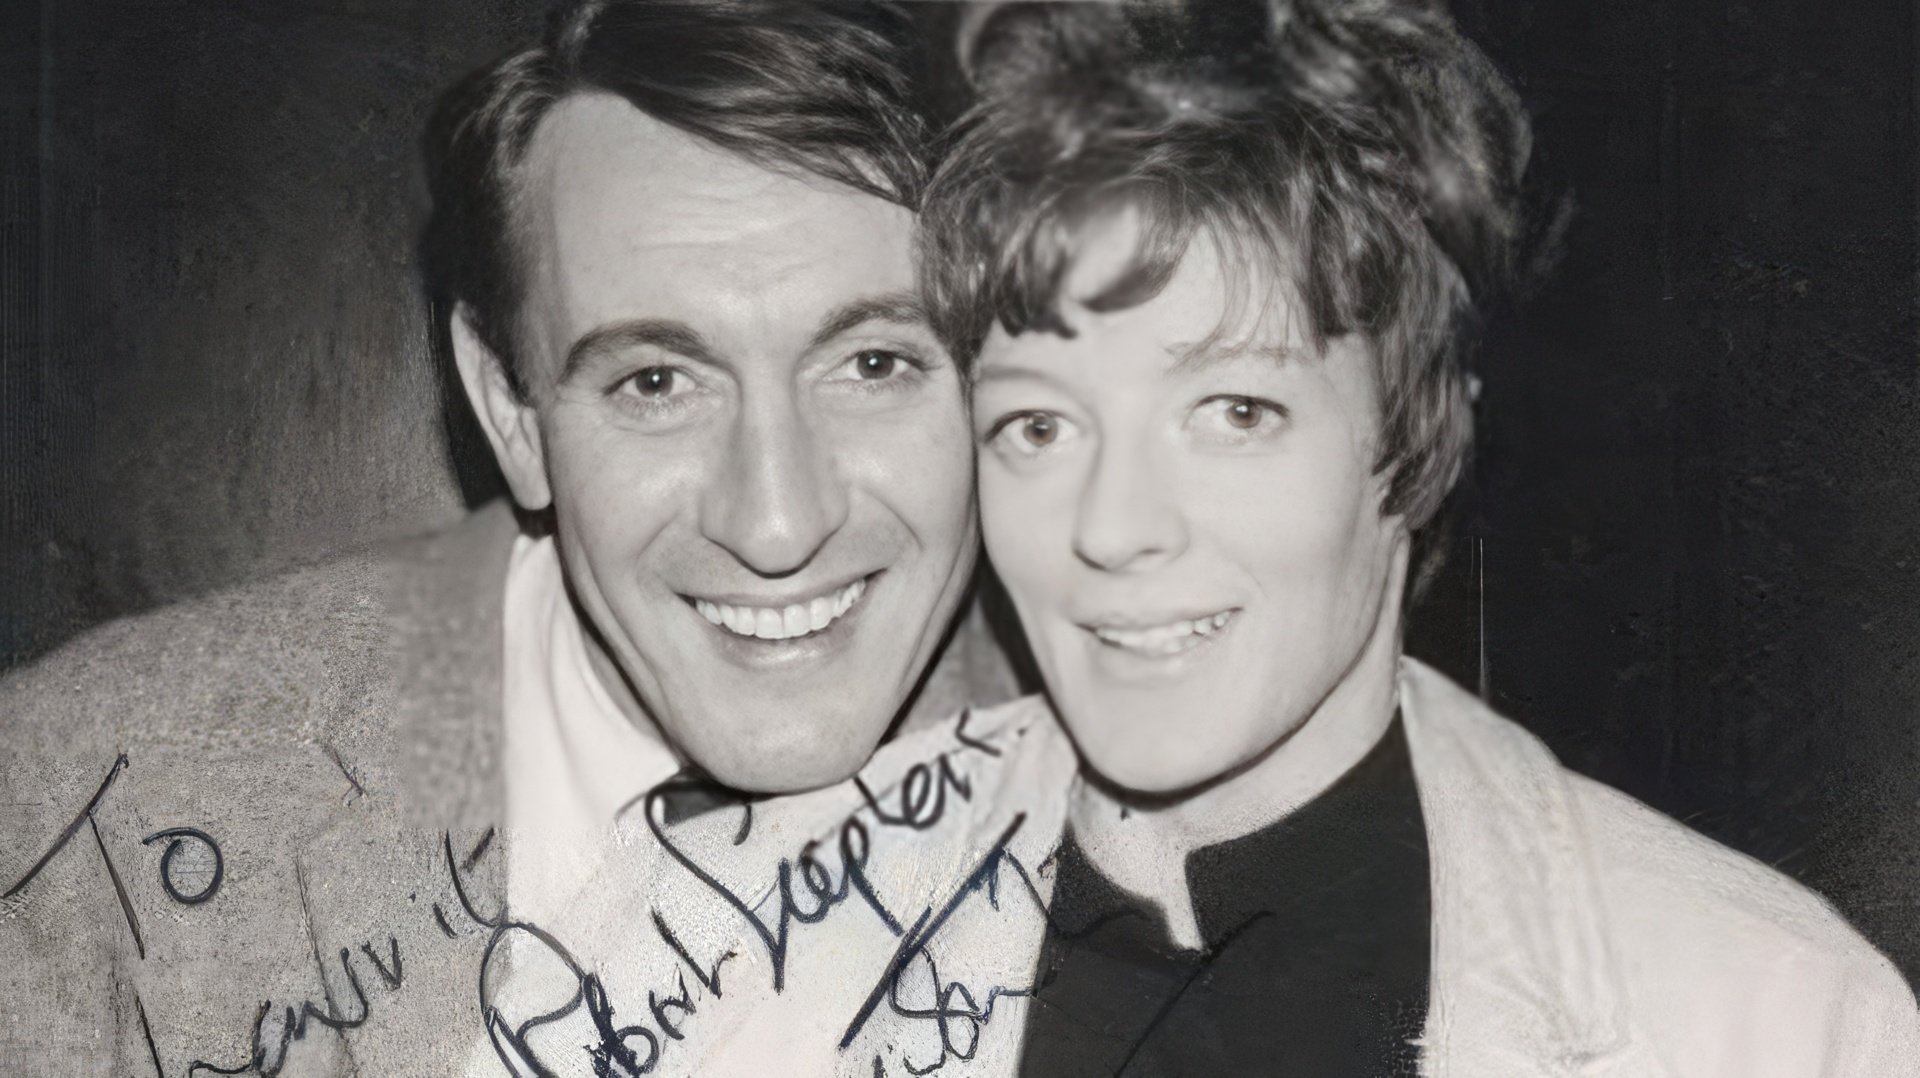 Maggie Smith and Robert Stephens